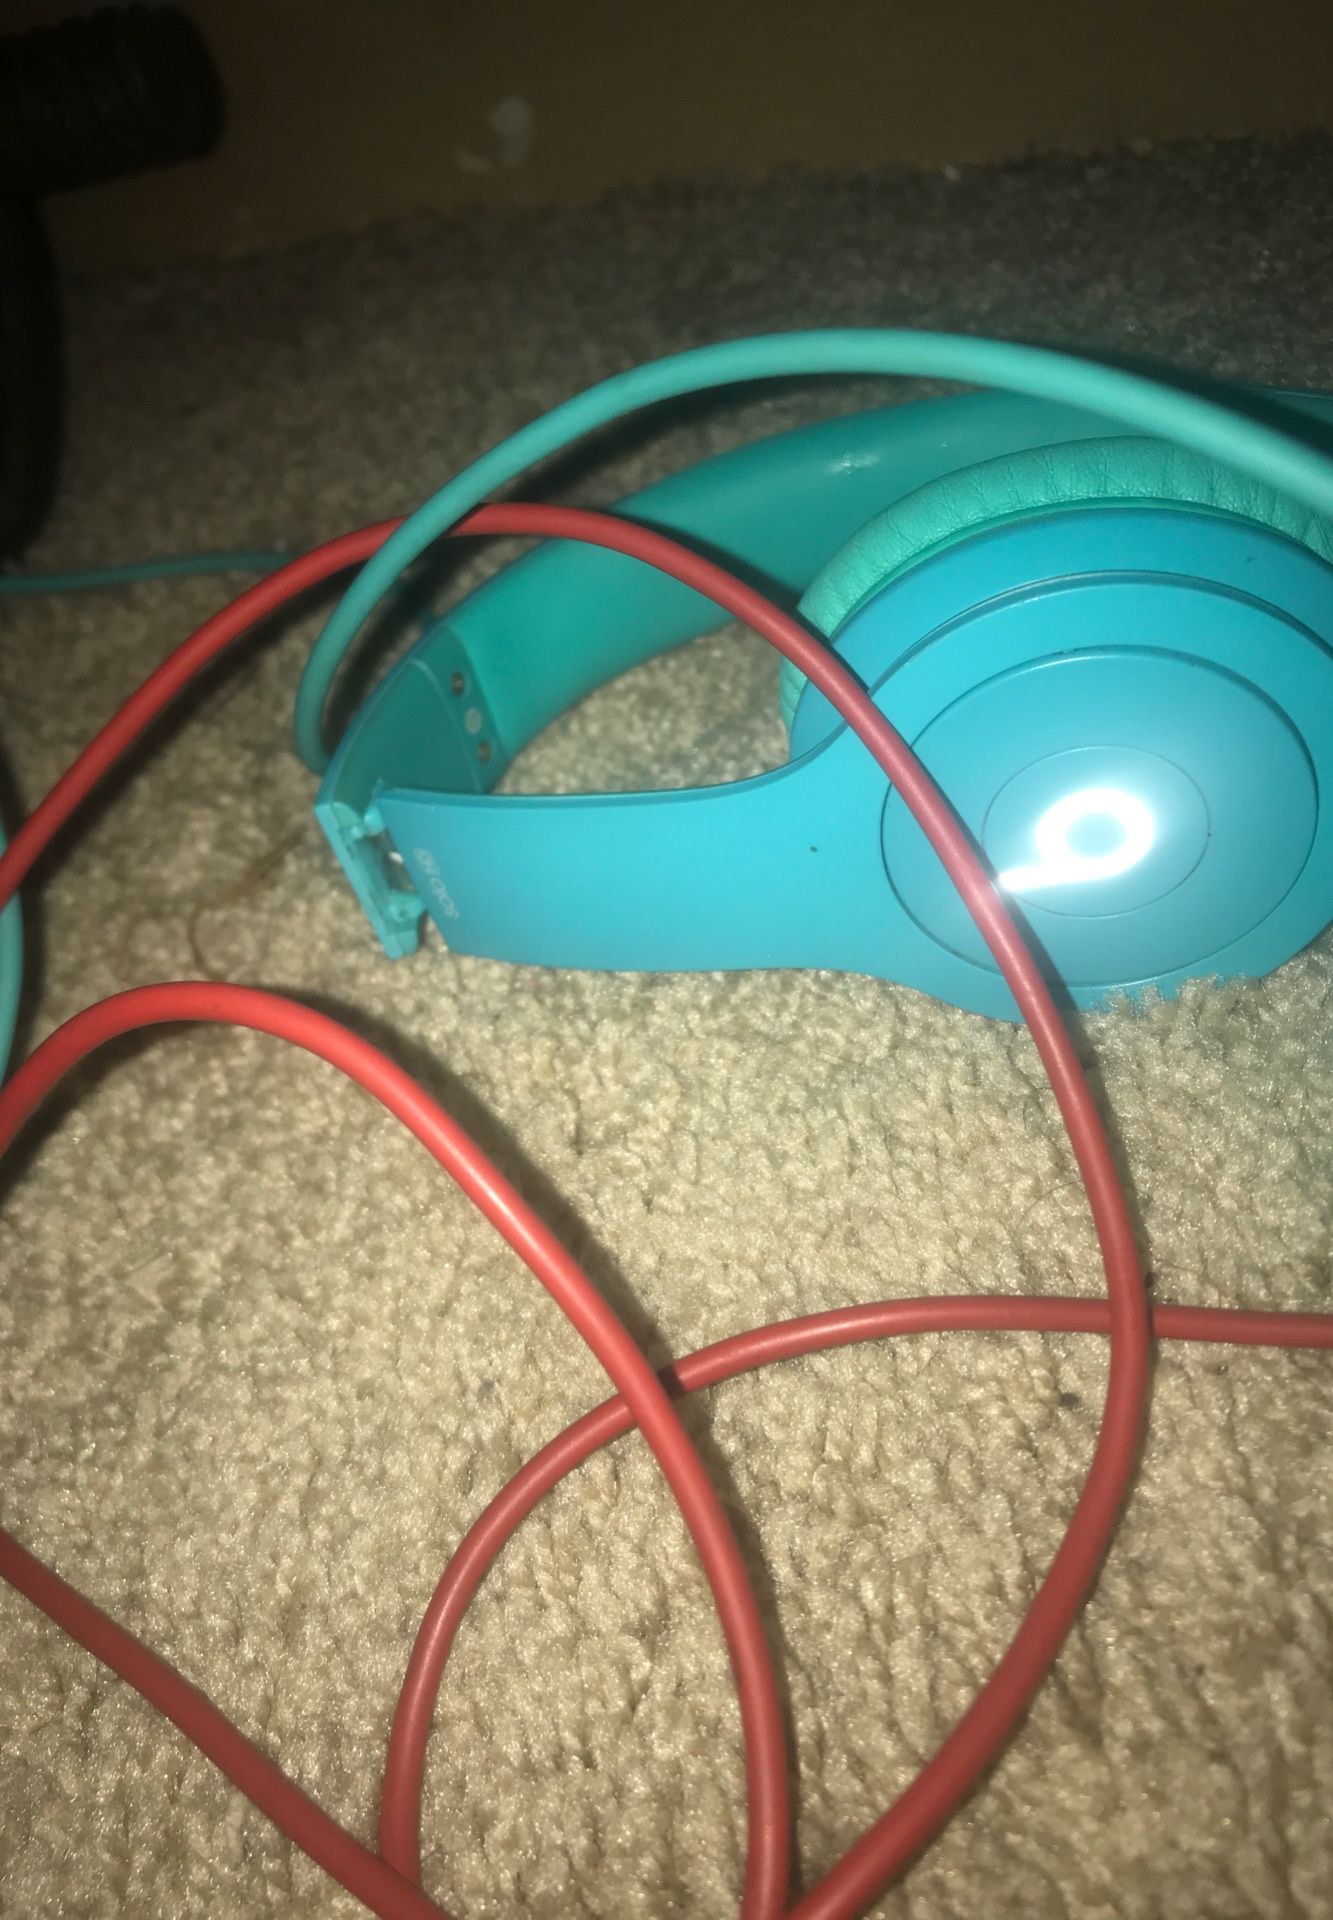 Wired beats in ok condition